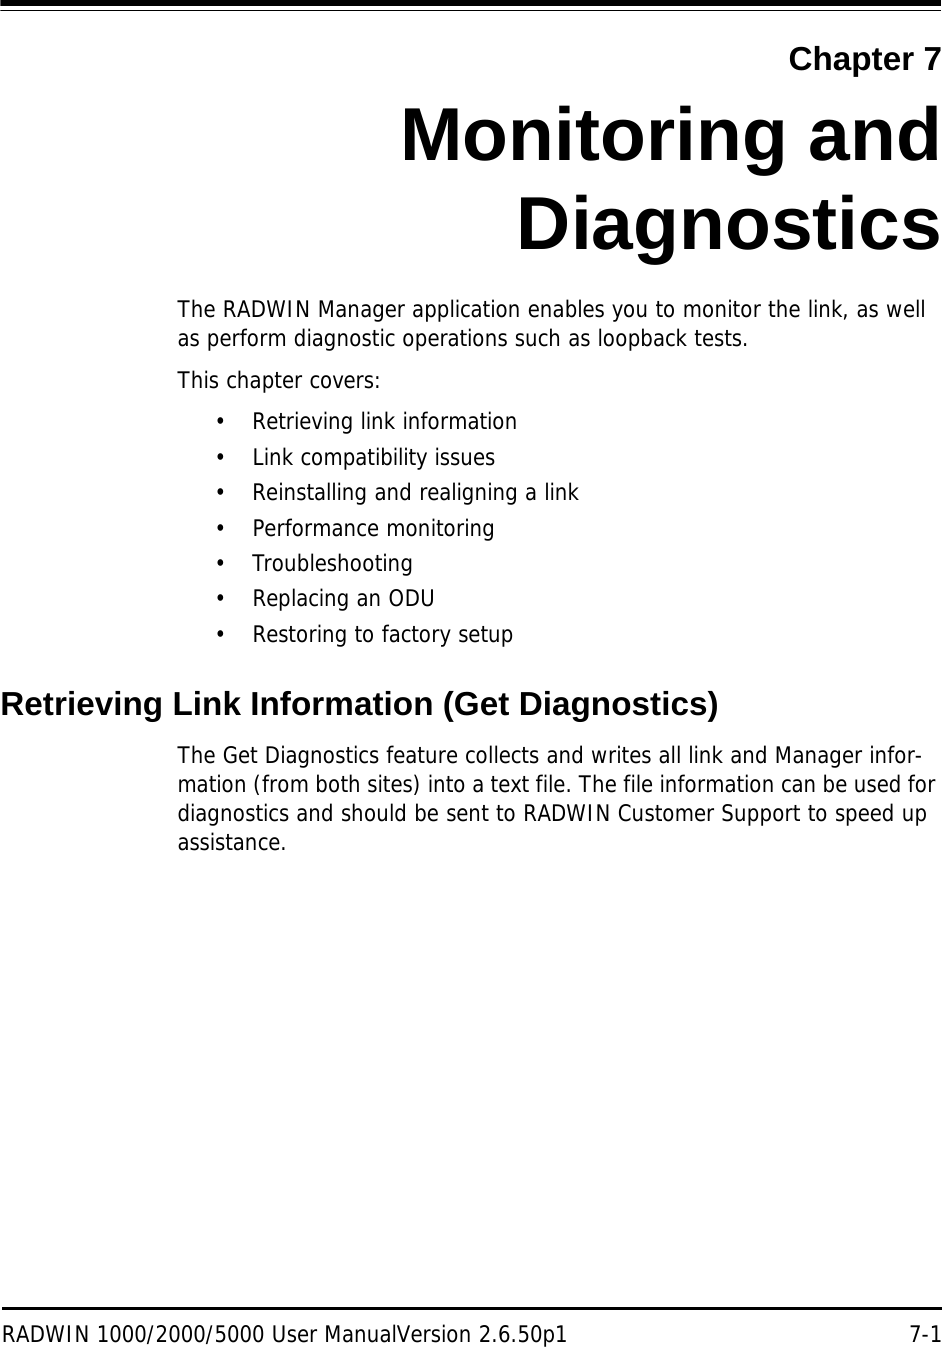 RADWIN 1000/2000/5000 User ManualVersion 2.6.50p1 7-1Chapter 7Monitoring andDiagnosticsThe RADWIN Manager application enables you to monitor the link, as well as perform diagnostic operations such as loopback tests. This chapter covers:• Retrieving link information• Link compatibility issues• Reinstalling and realigning a link• Performance monitoring• Troubleshooting•Replacing an ODU• Restoring to factory setupRetrieving Link Information (Get Diagnostics)The Get Diagnostics feature collects and writes all link and Manager infor-mation (from both sites) into a text file. The file information can be used for diagnostics and should be sent to RADWIN Customer Support to speed up assistance.